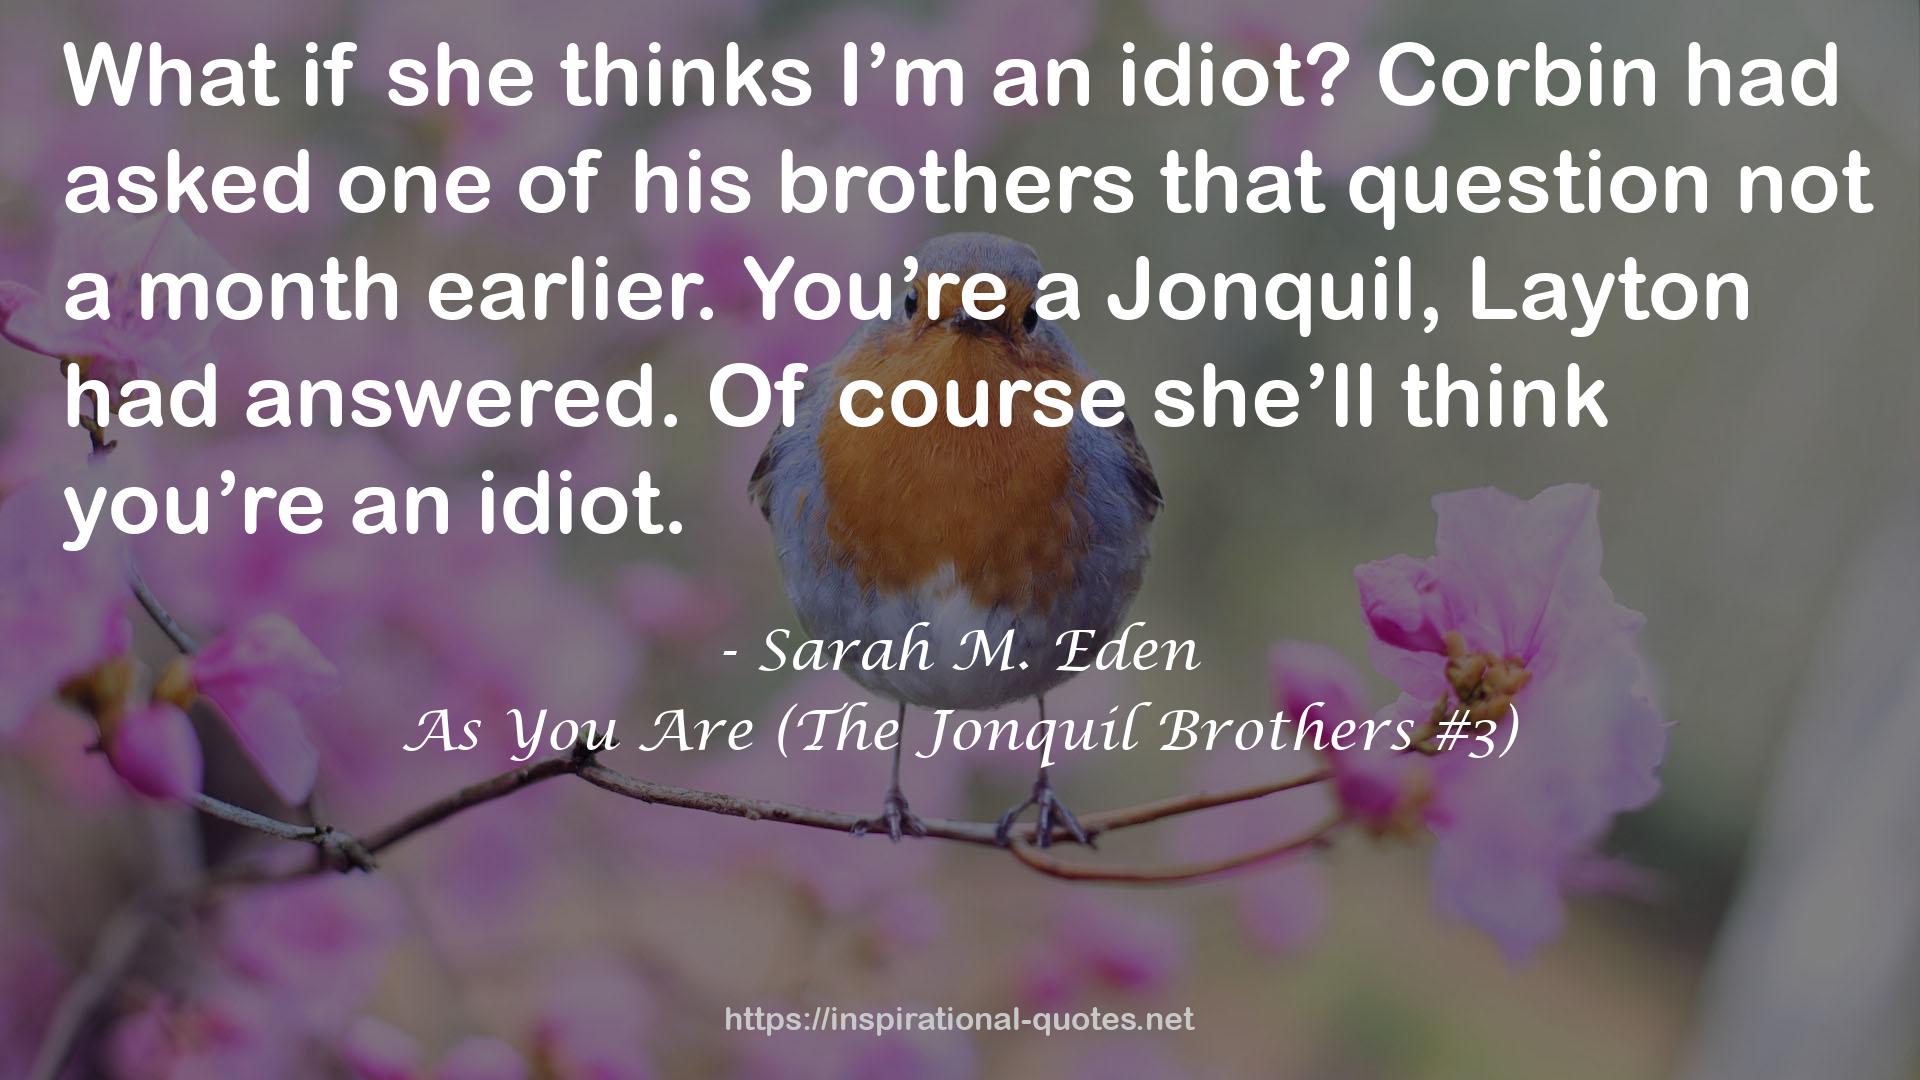 As You Are (The Jonquil Brothers #3) QUOTES